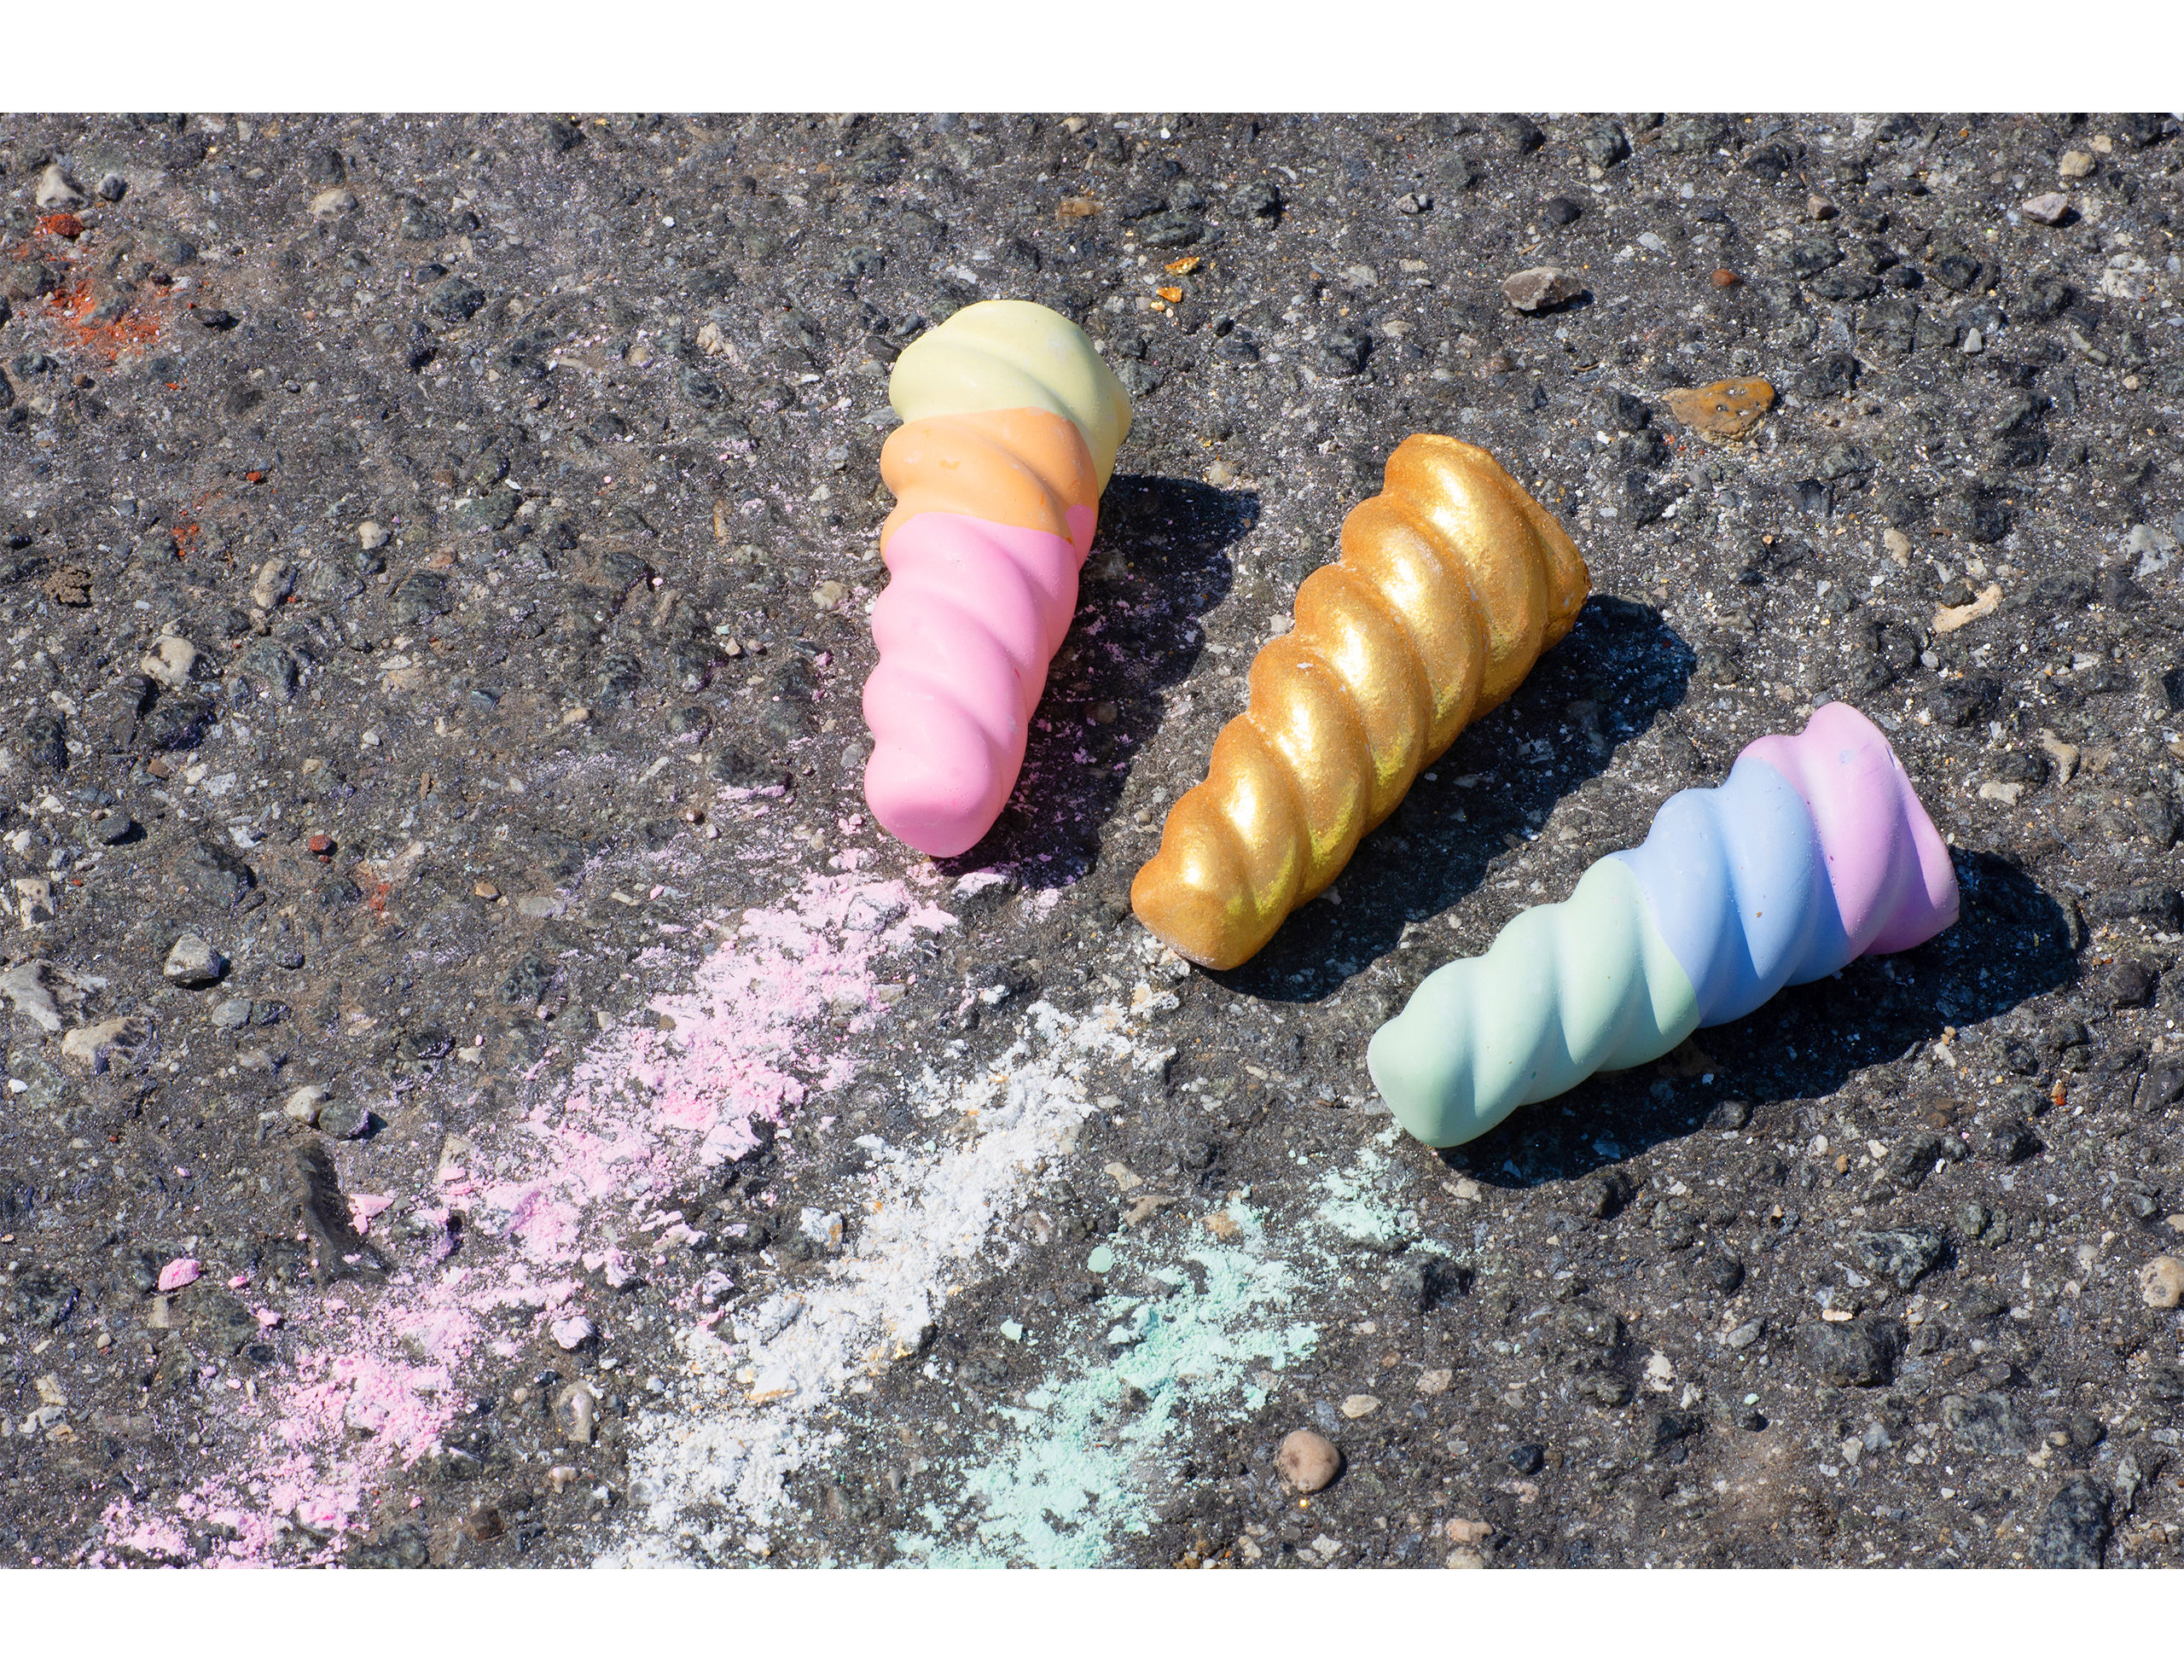 TWEE Unicorn Narwhal Chalk being used on driveway. One cool horn, one warm horn & one gold and glitter-coated white chalk horn.